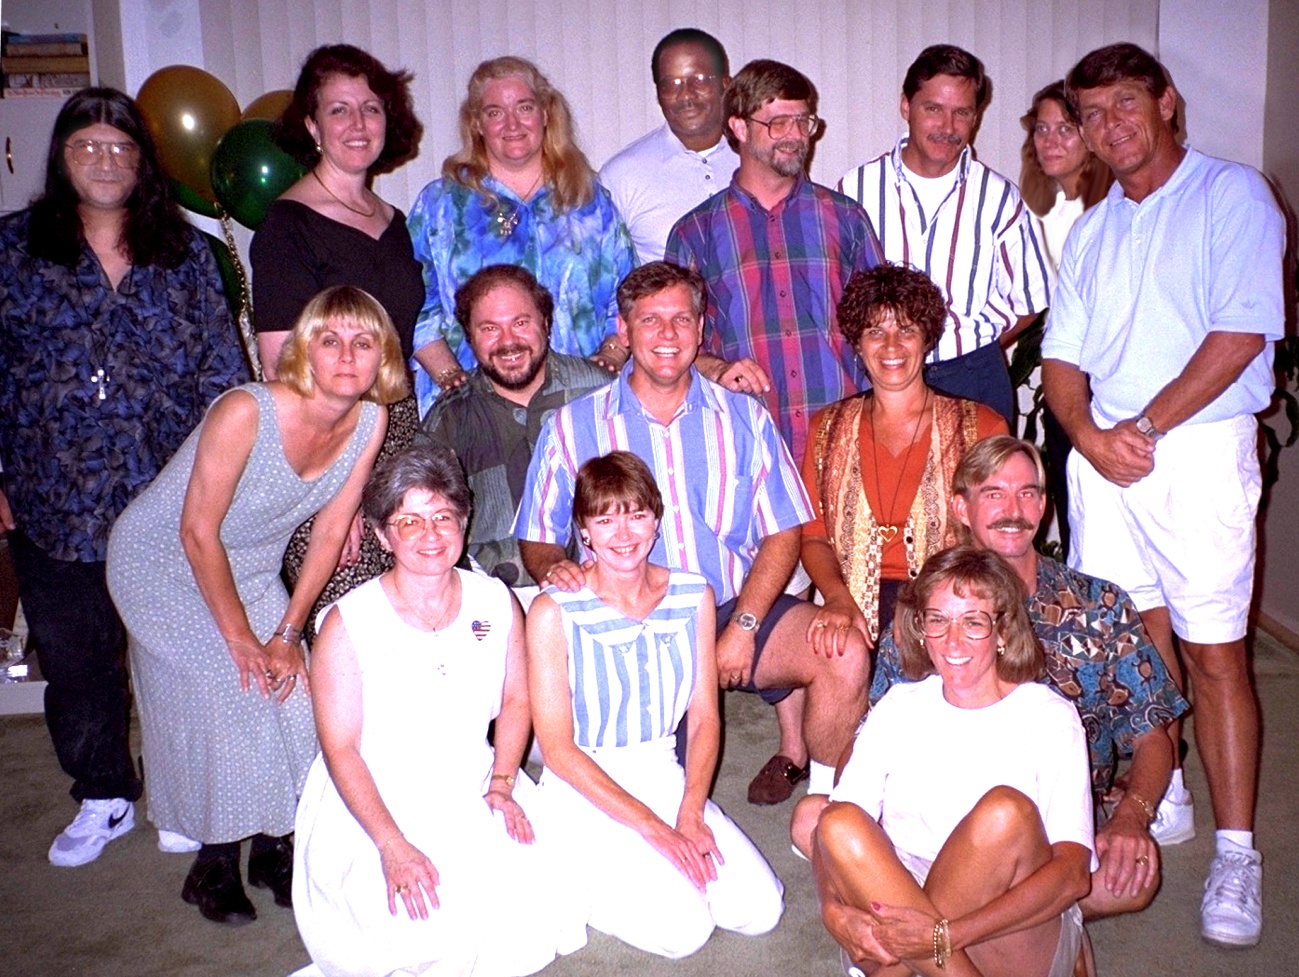 <b>All class members at Charlie's party</b><br />Back row: Louis, Nancy, Diana, Thomas, Bobby, Dennis, Mary, Danny<br />Middle row: Susan, me, Charlie, Janis<br />Front row: Nancy M., Pam, Kim